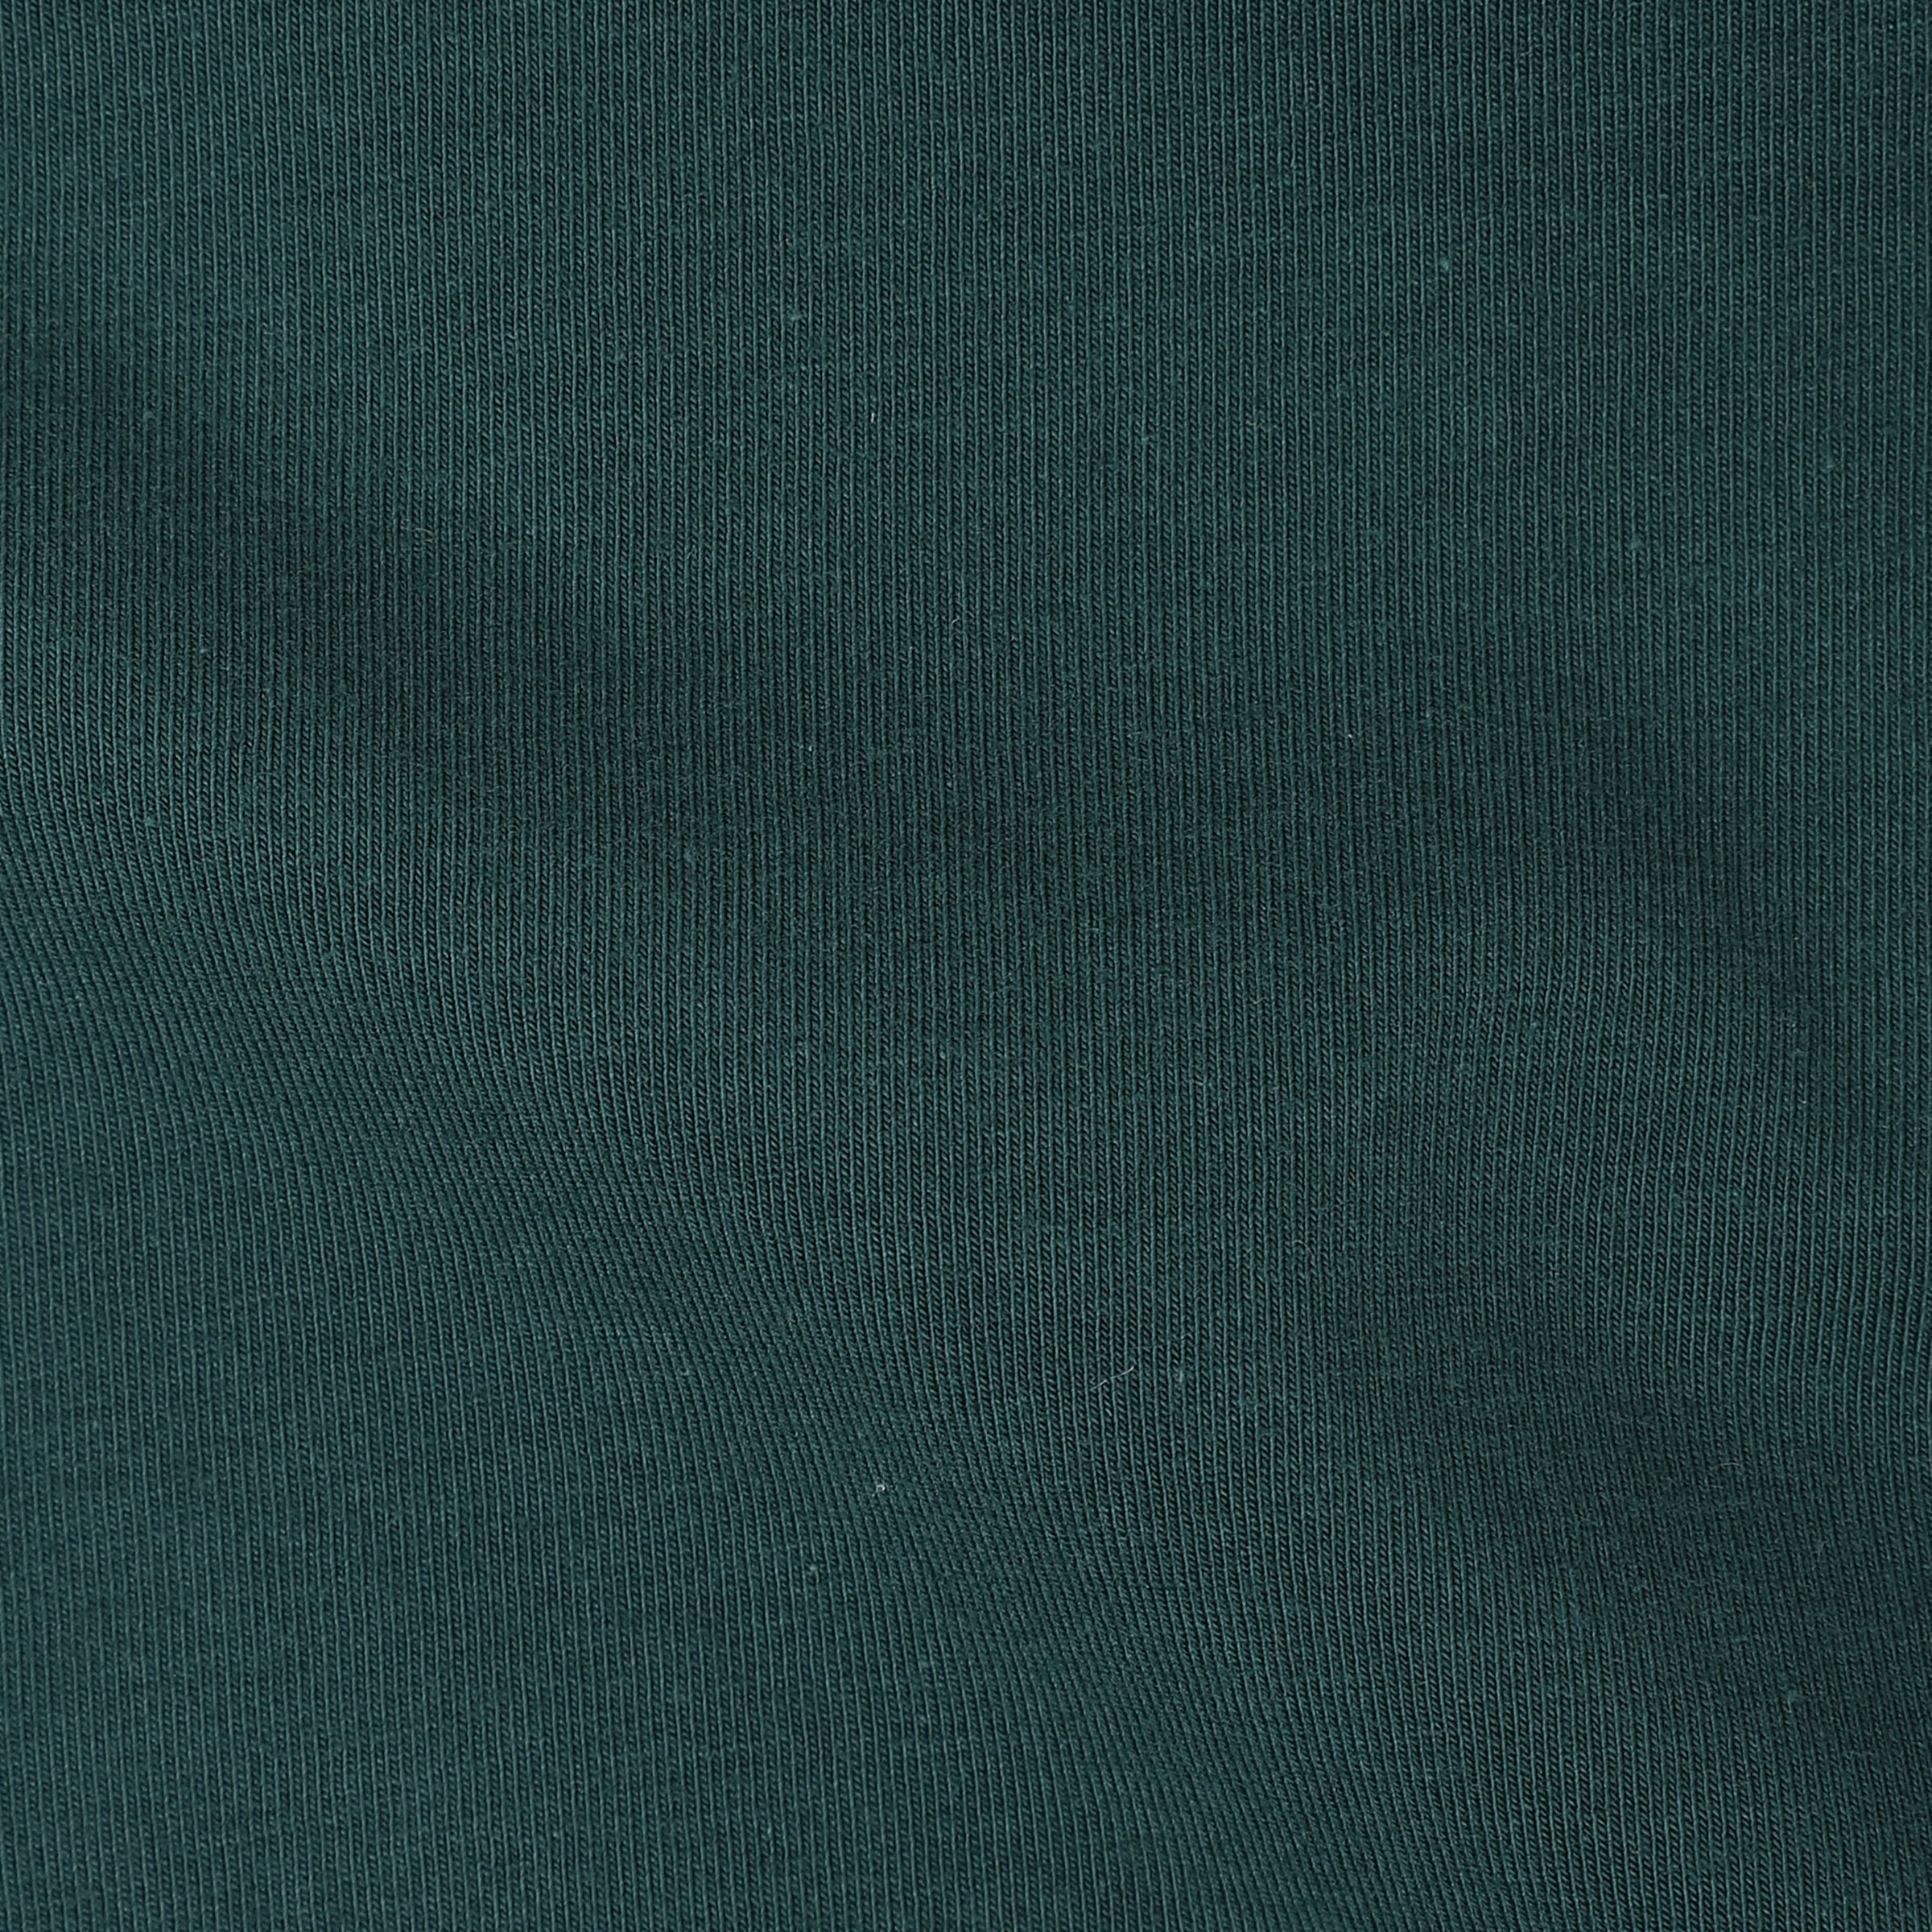 Supima Curved Tee Field Green close up of fabric